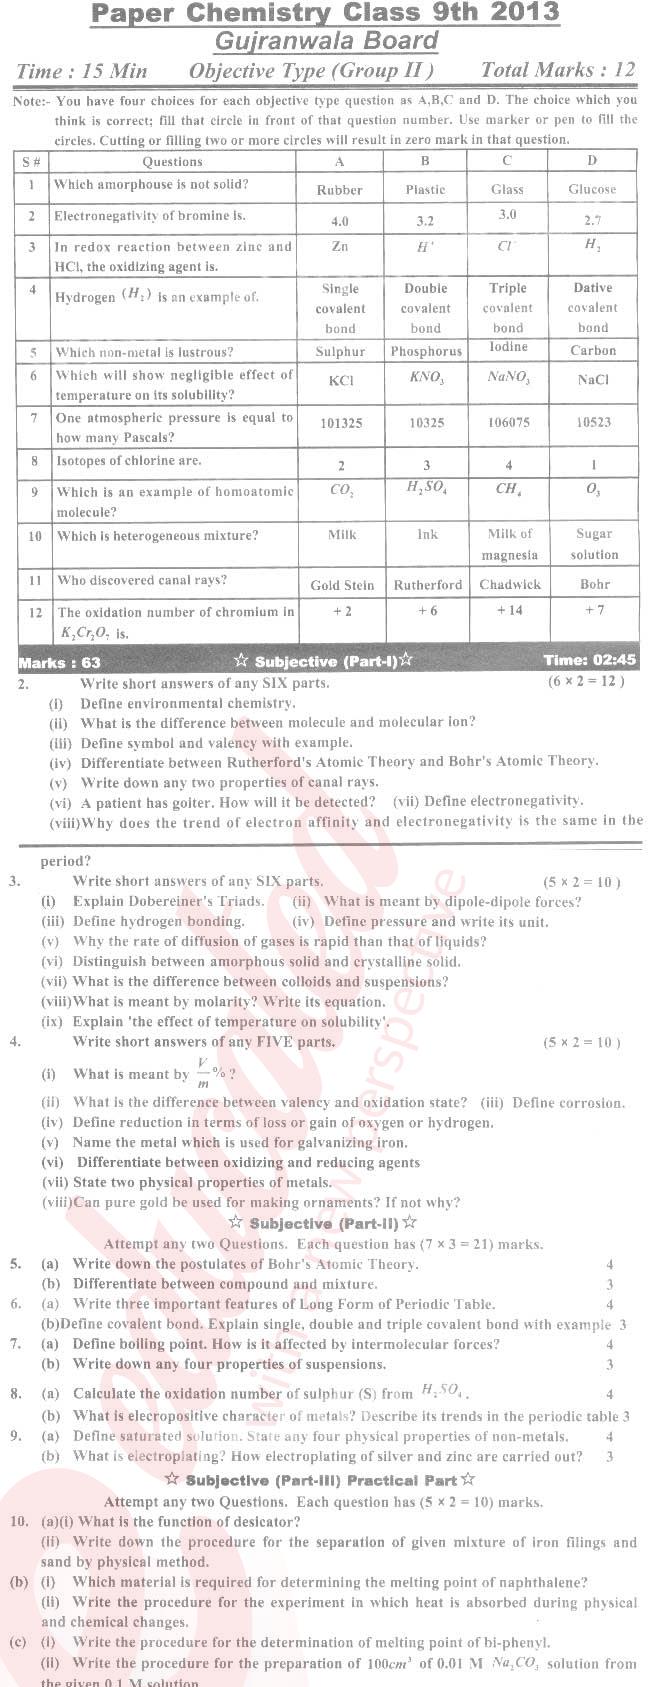 Chemistry 9th English Medium Past Paper Group 2 BISE Gujranwala 2013